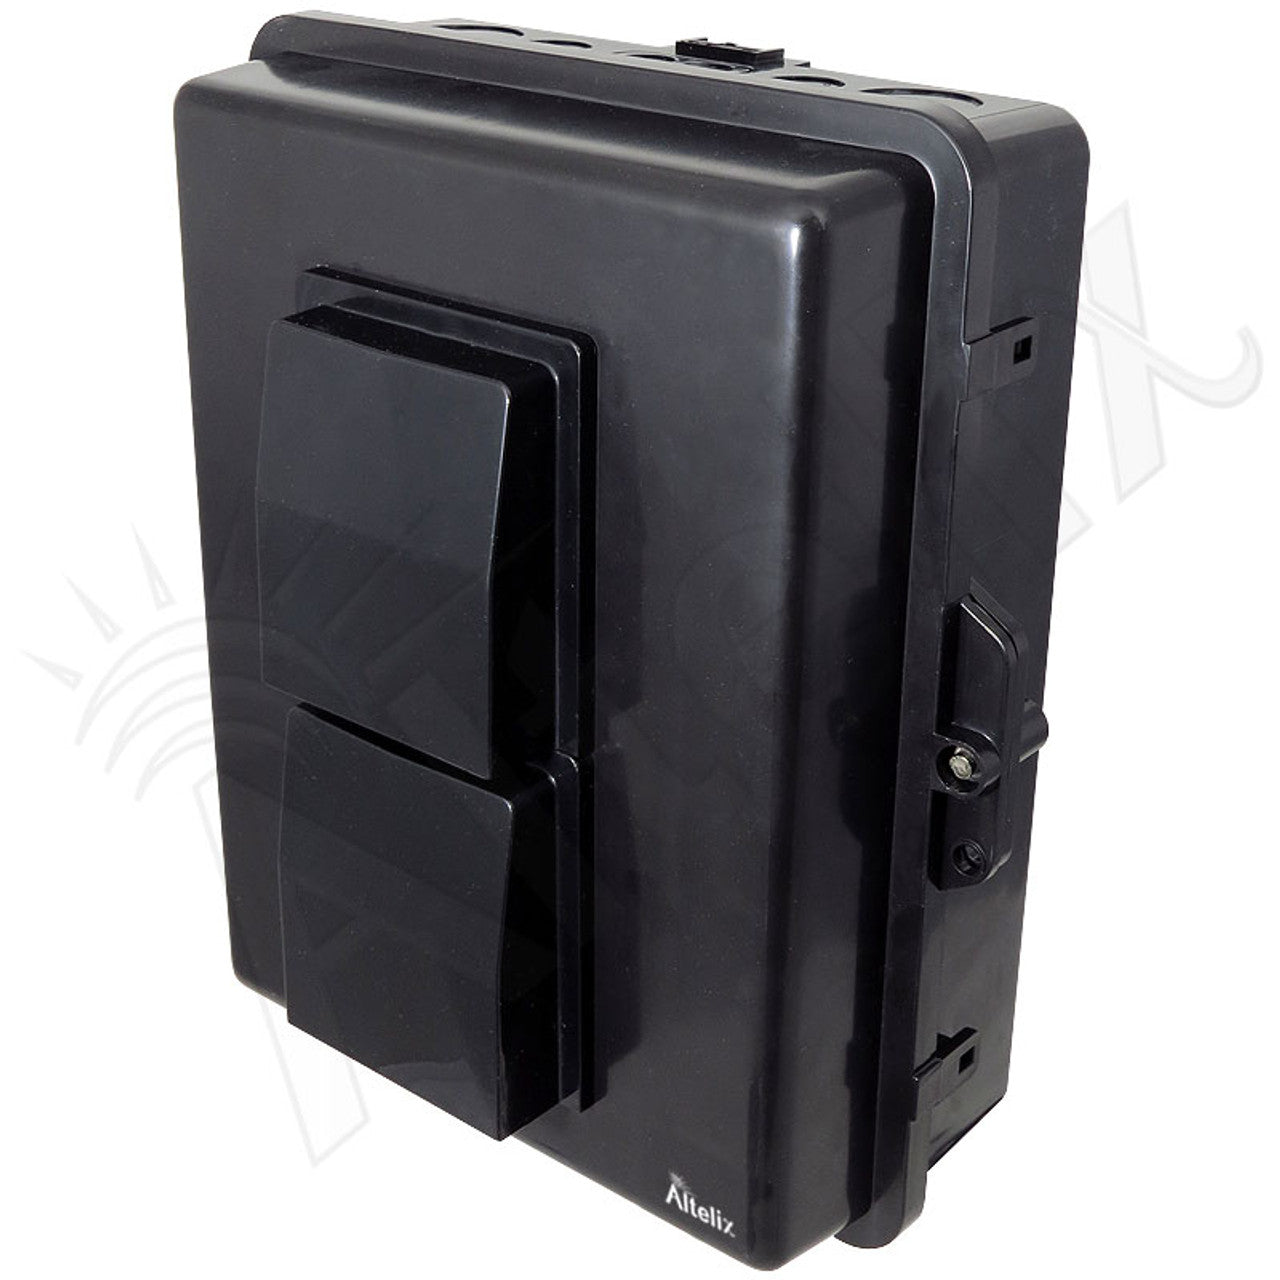 Buy black Altelix 14x11x5 Polycarbonate + ABS Vented Weatherproof NEMA Enclosure with Aluminum Mounting Plate, 120 VAC Outlets &amp; Power Cord